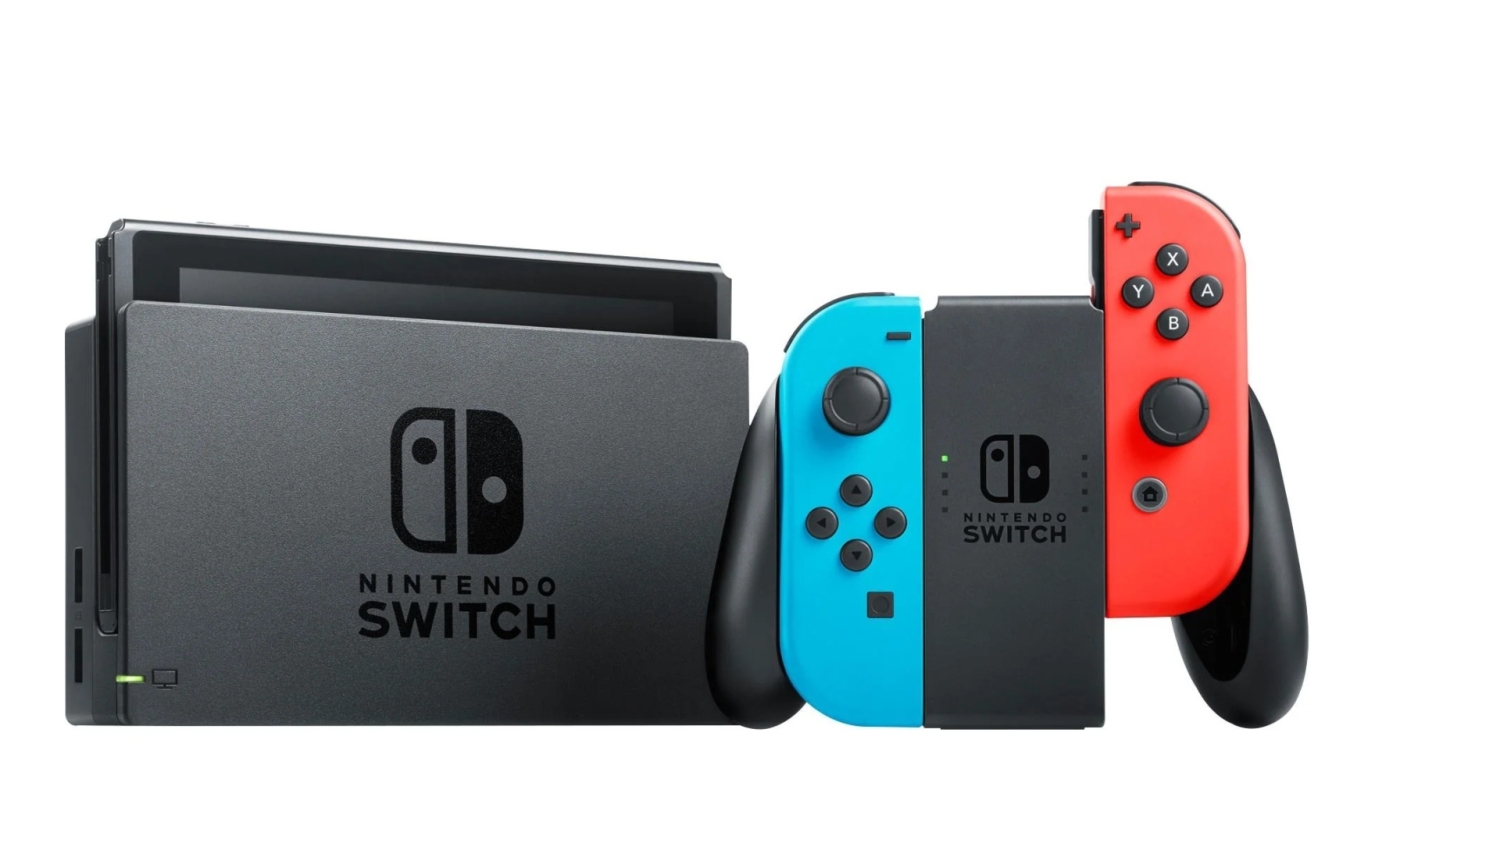 Nintendo's president says it will continue to support Switch next